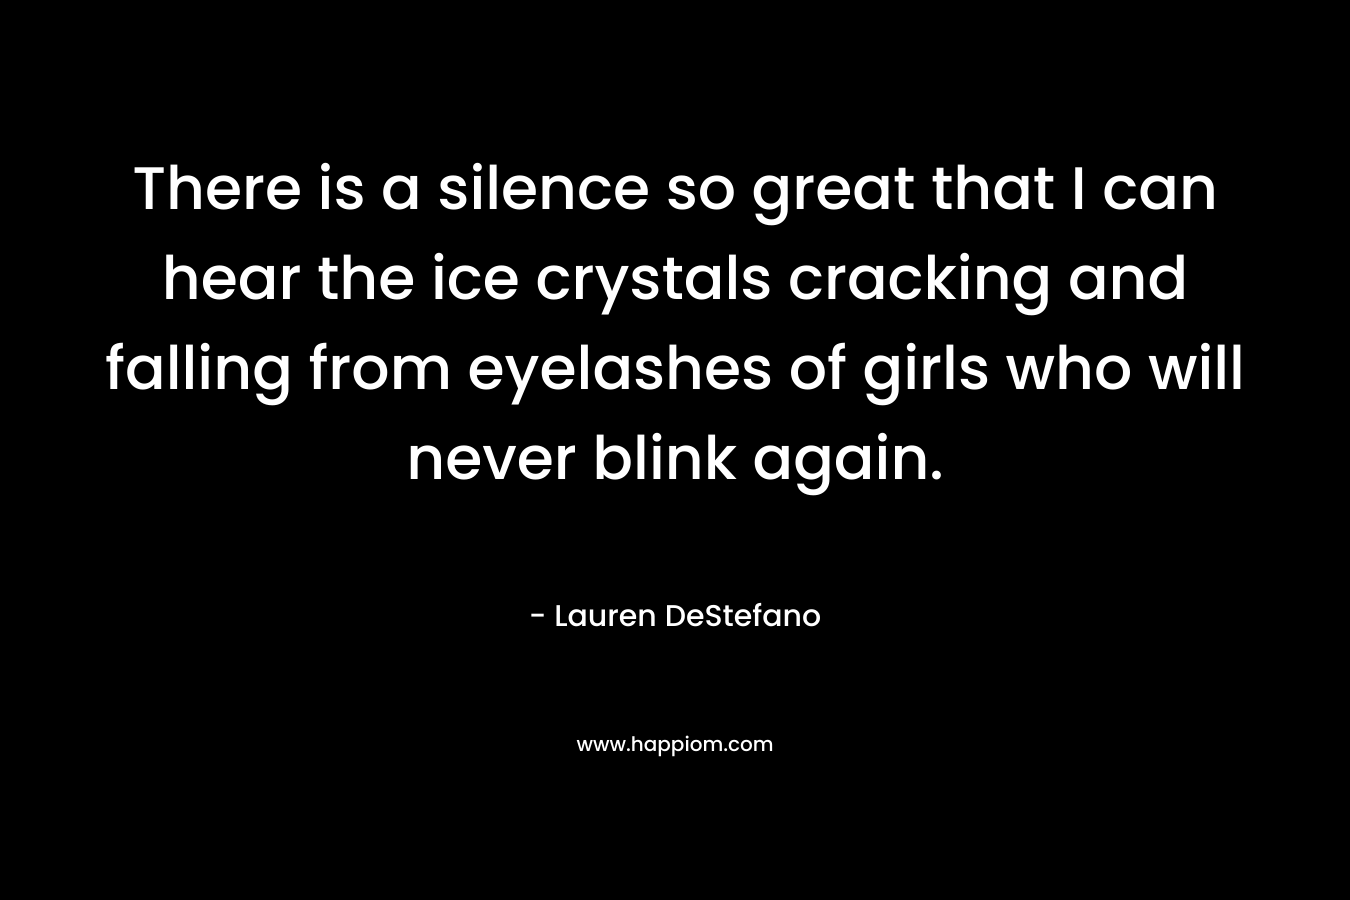 There is a silence so great that I can hear the ice crystals cracking and falling from eyelashes of girls who will never blink again. – Lauren DeStefano